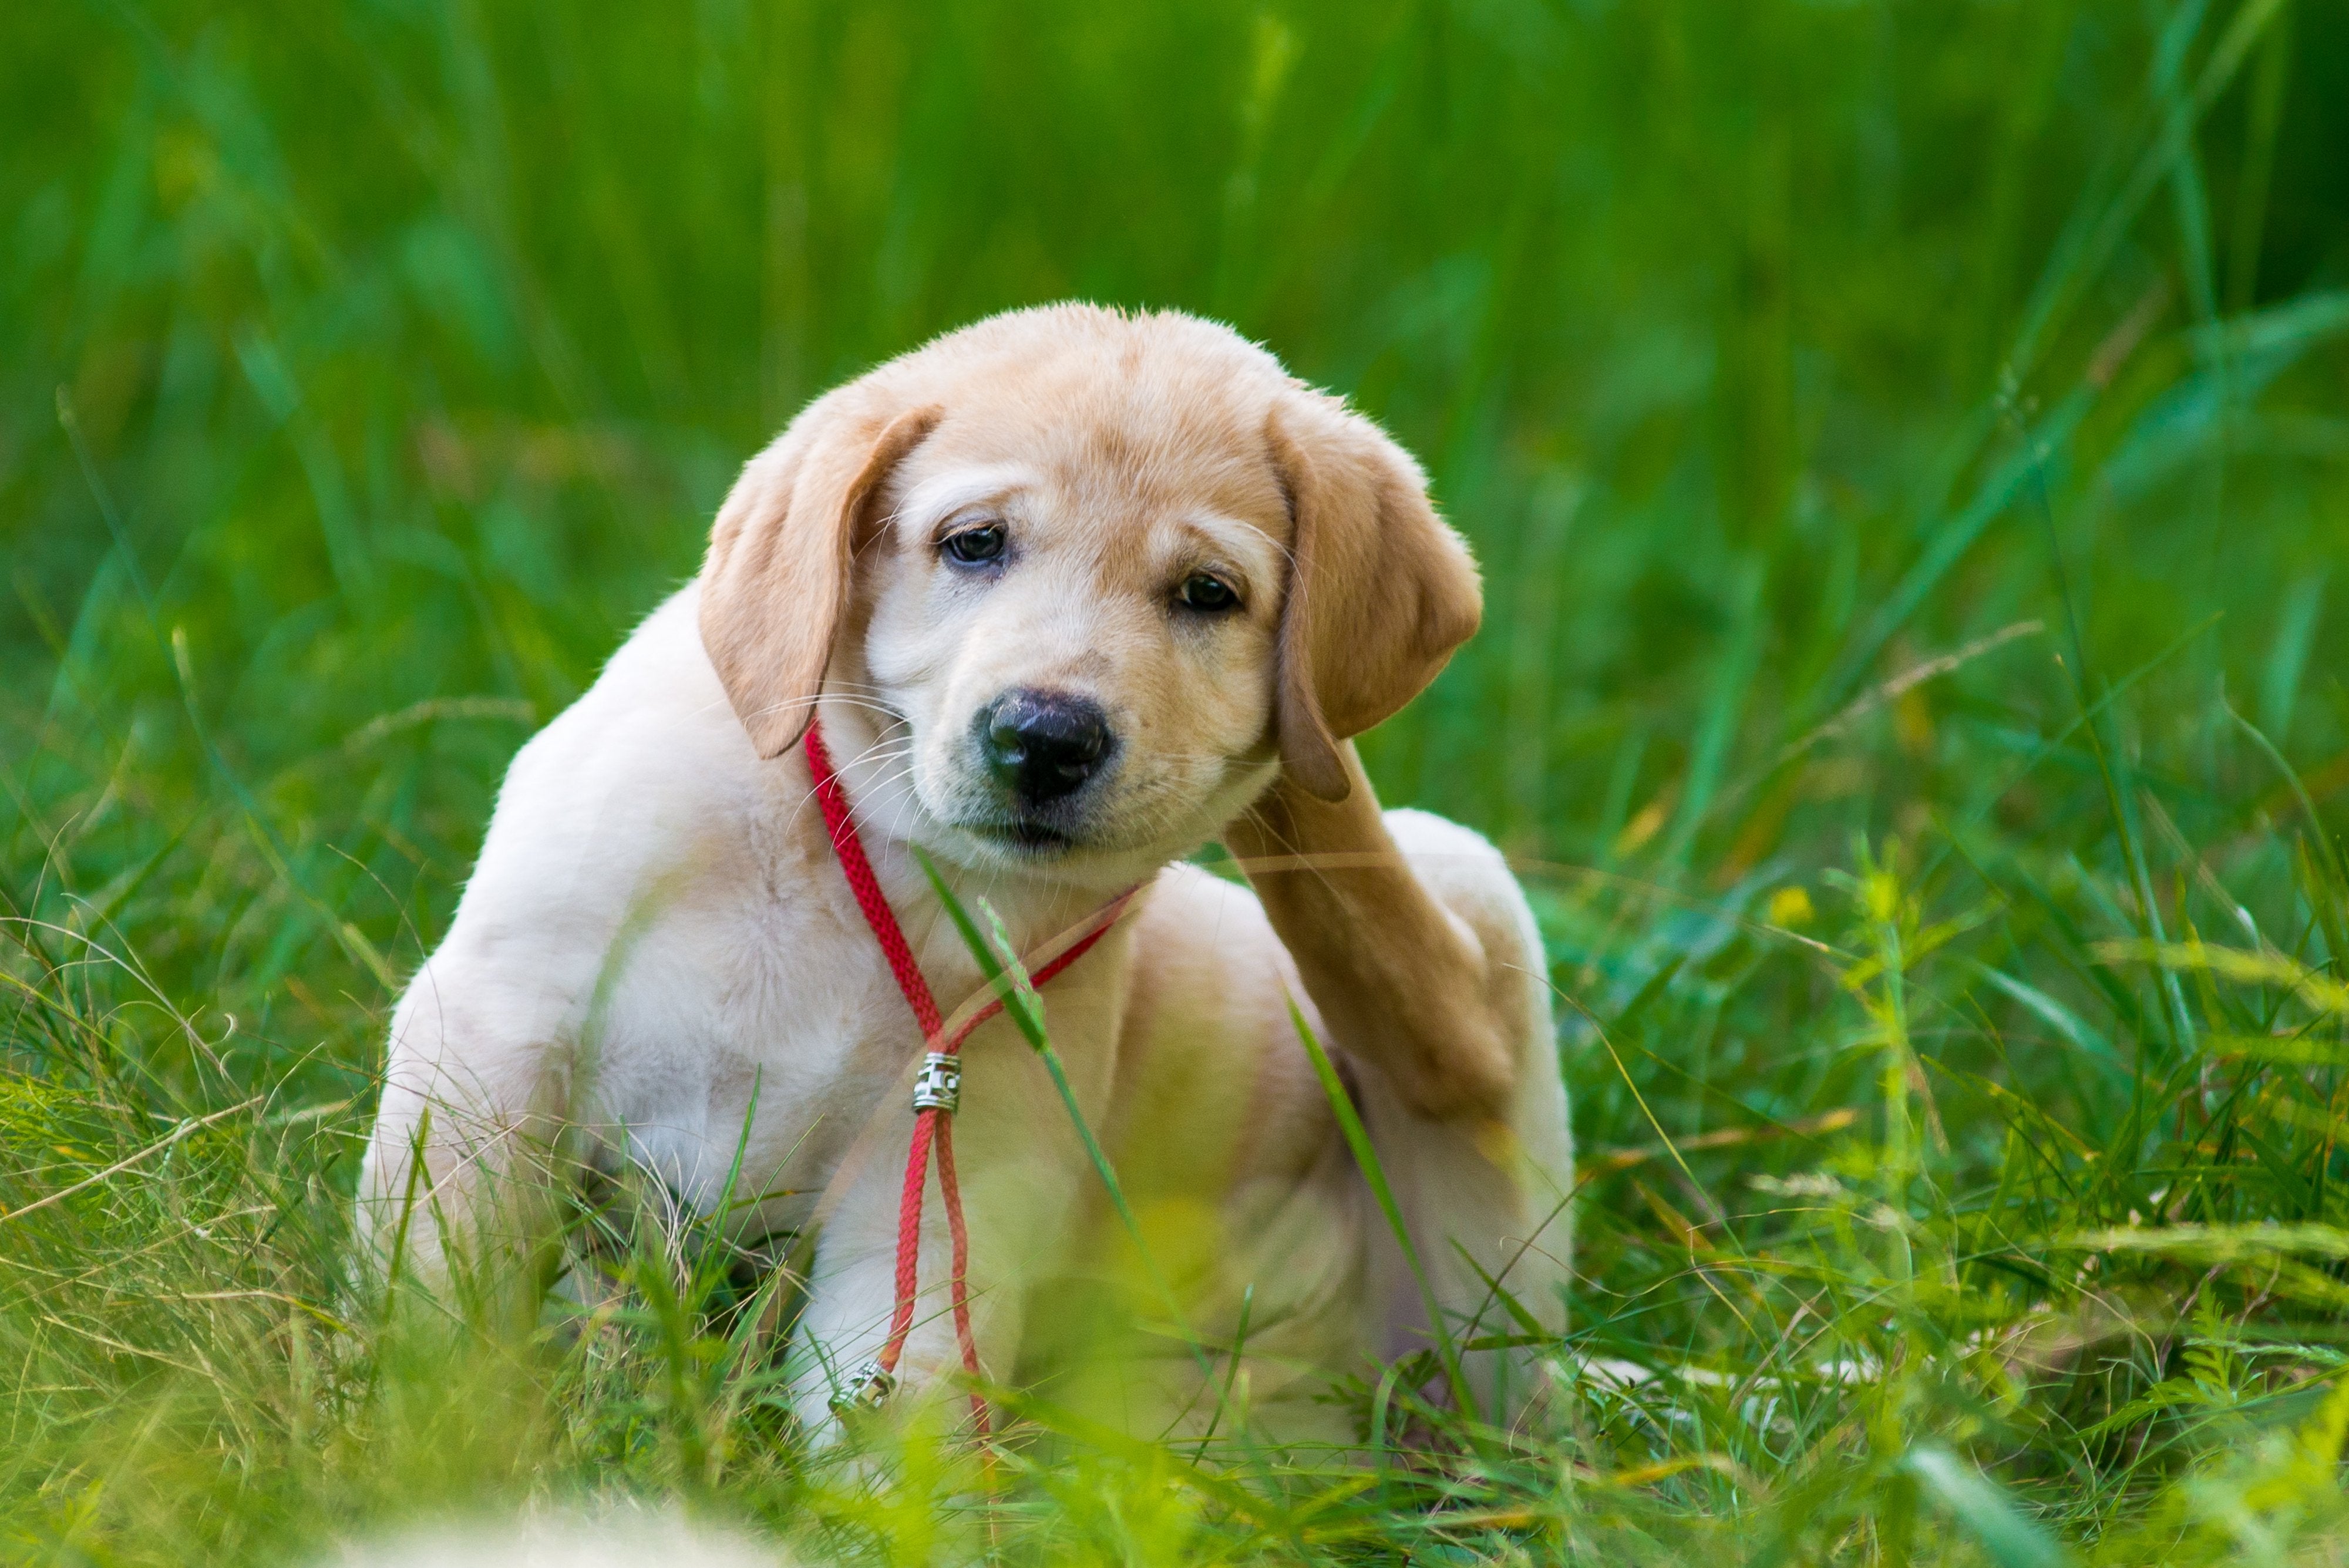 Dog itching in field of grass